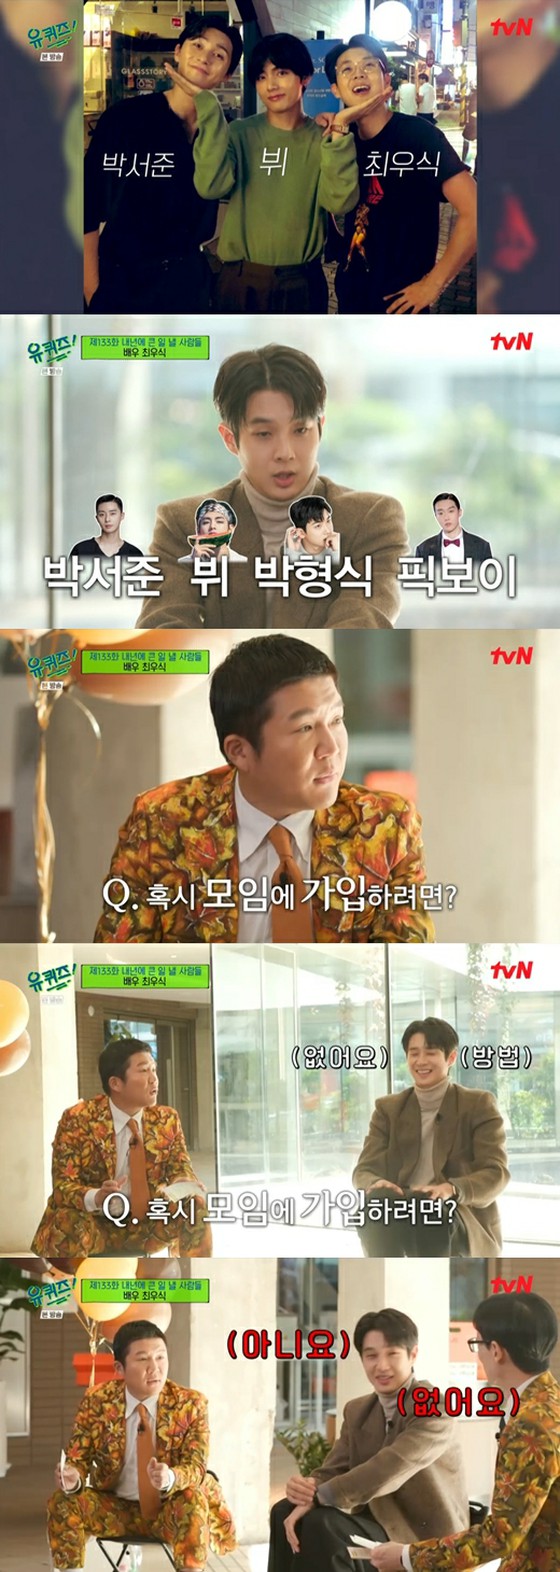 Actor Choi Woo-shik said, "Park Seo-joon, how do you attend a meeting with V?I don't have any."